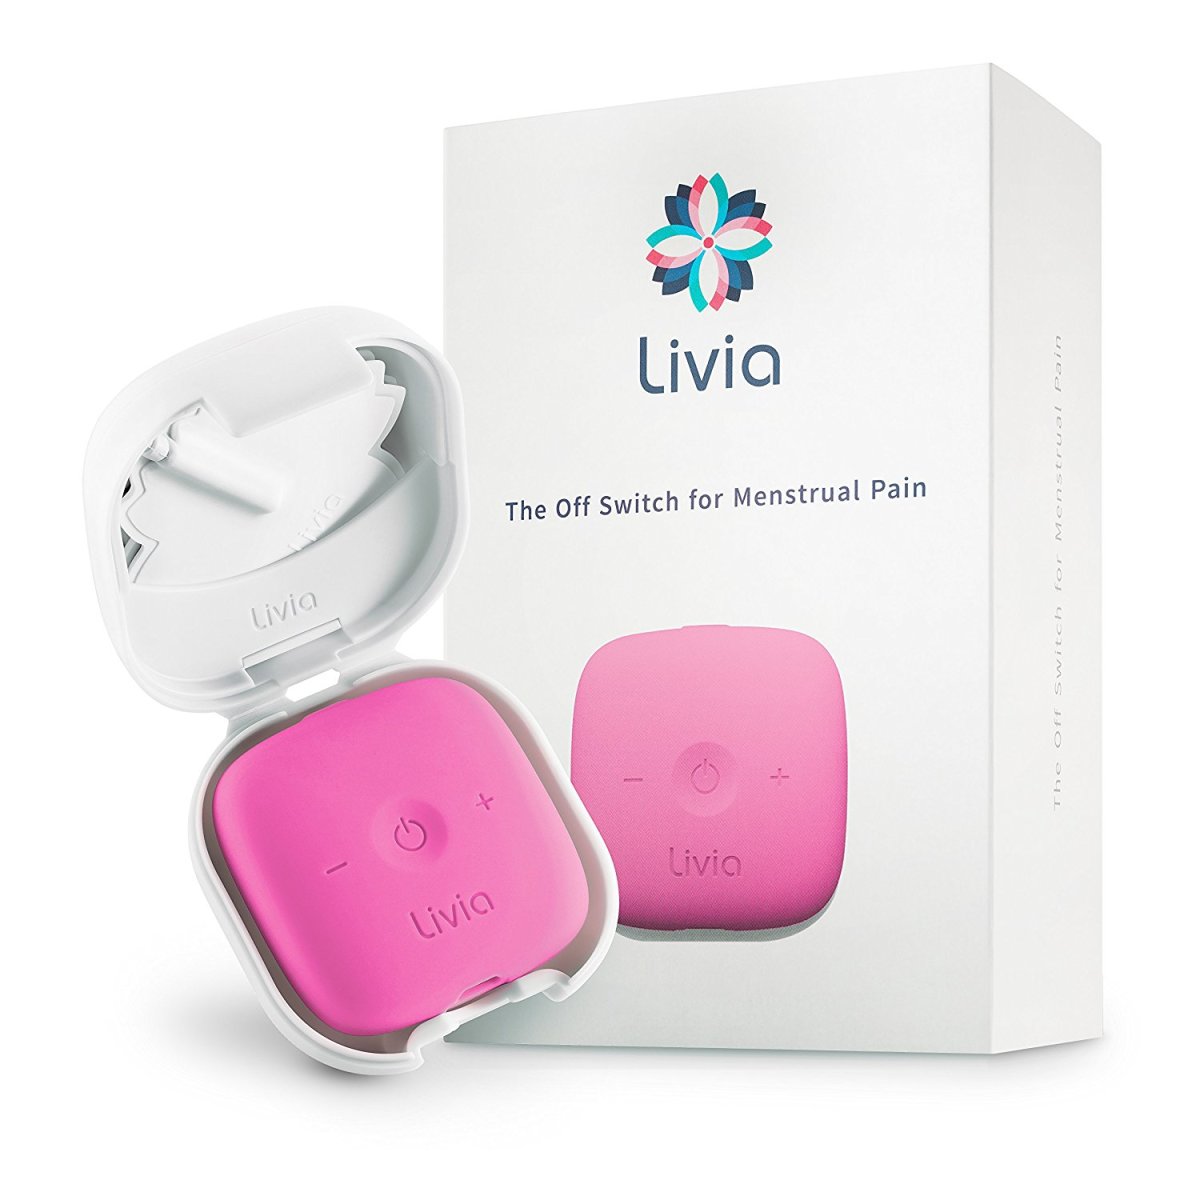 Livia - The Off Switch for Menstrual Pain